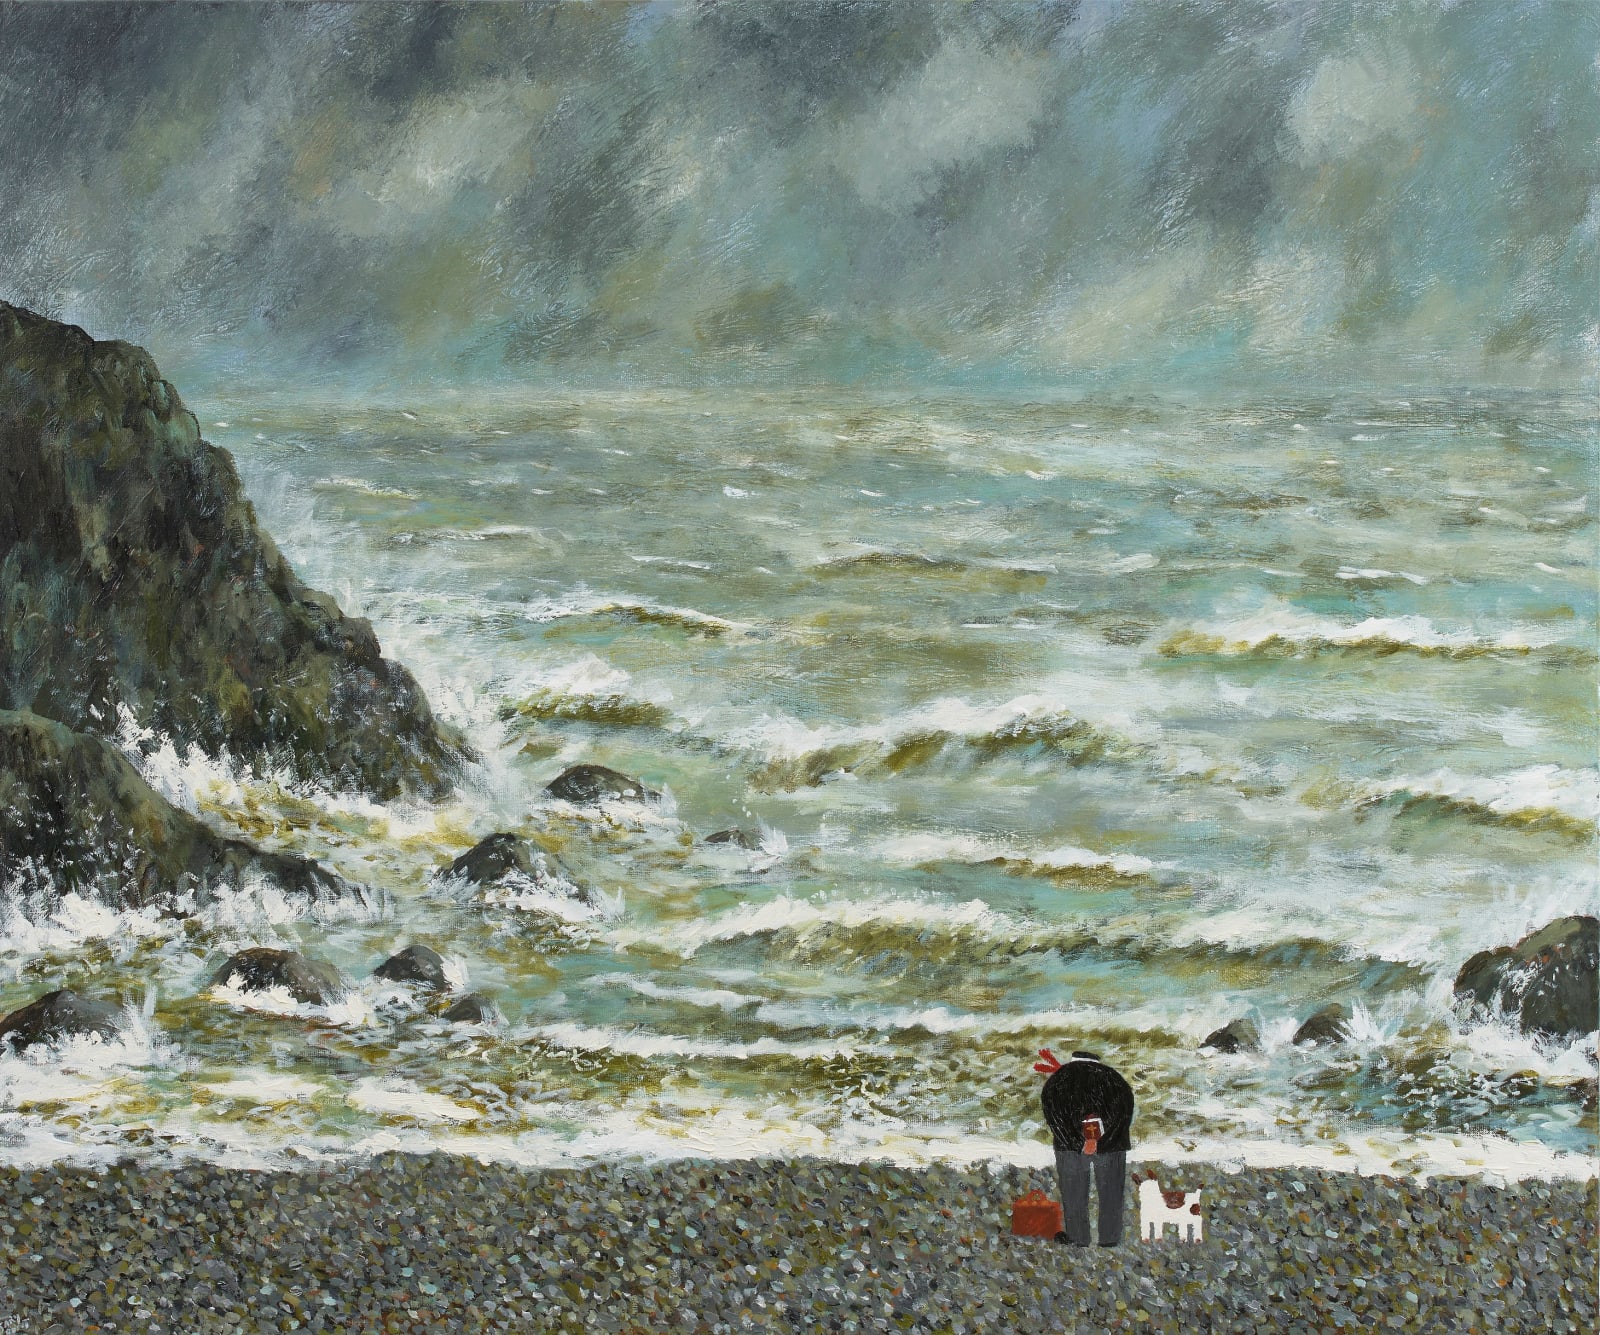 Gary Bunt, The Storm